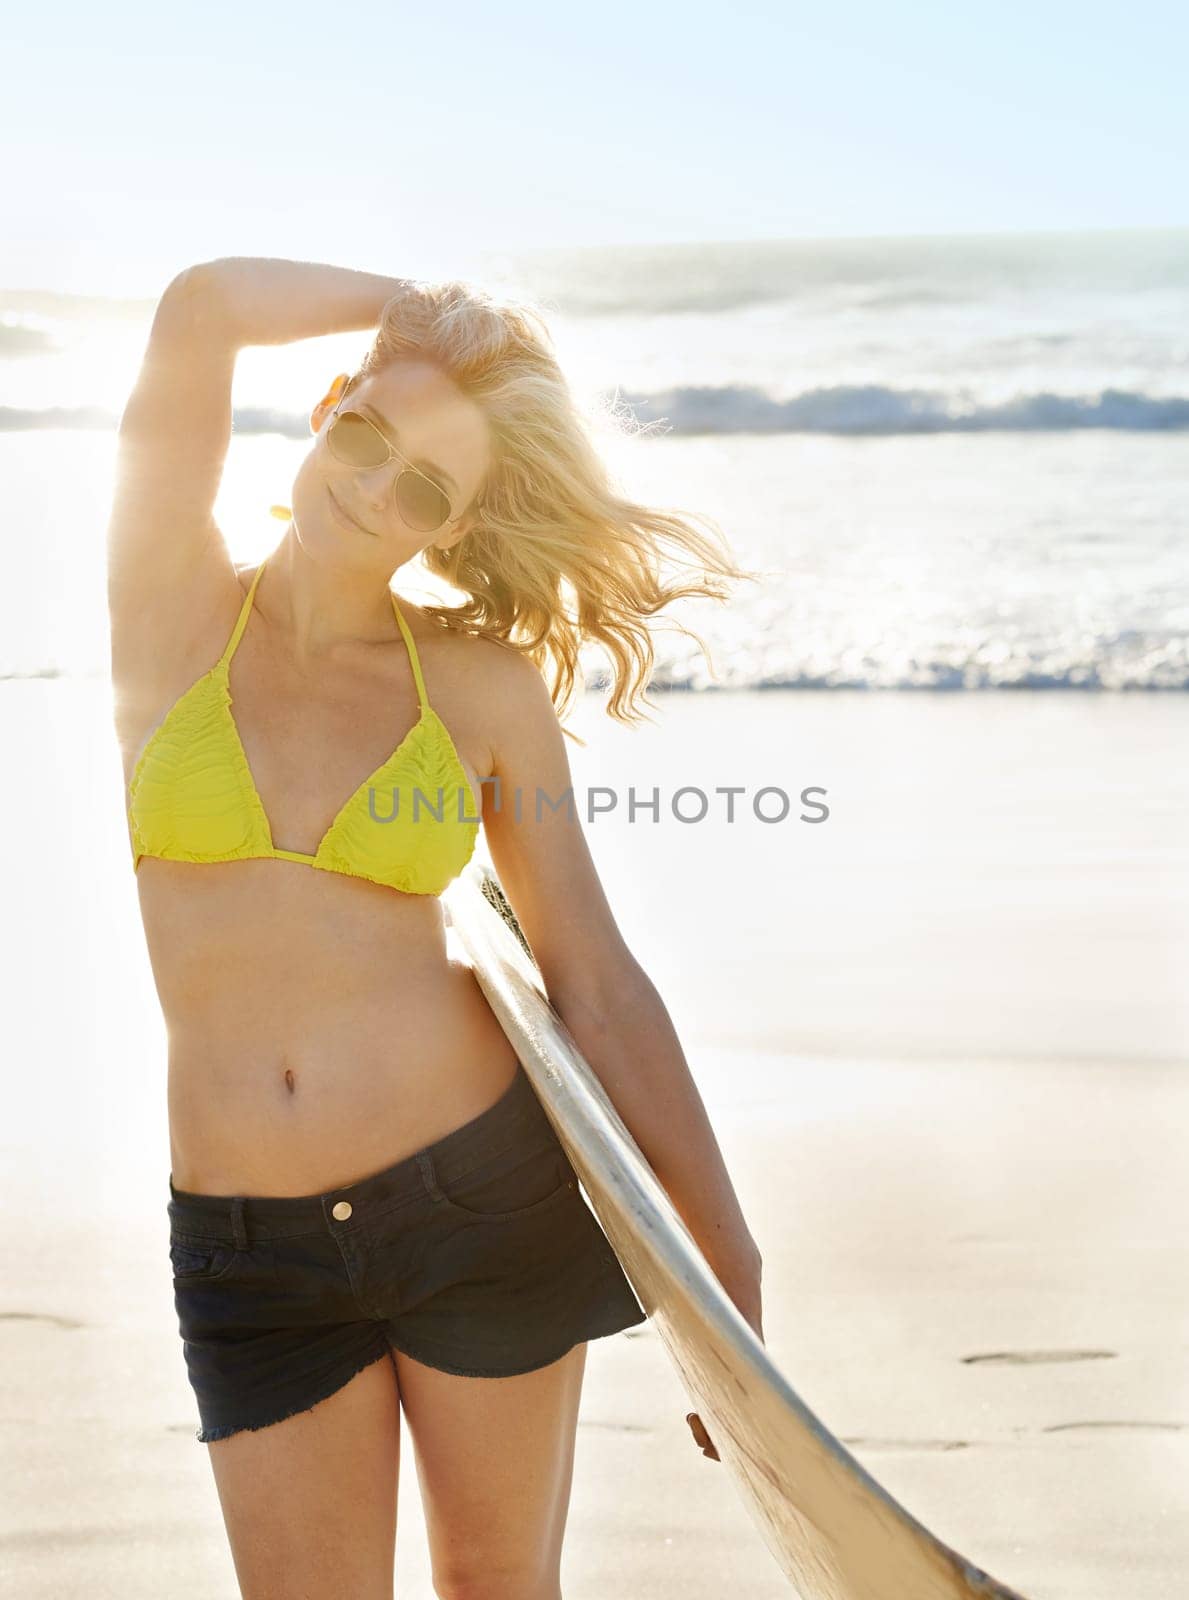 Surfboard, sunglasses and woman by beach for vacation, adventure or holiday in Australia for travel. Happy, water sports and female surfer in bikini by ocean or sea for tropical island weekend trip. by YuriArcurs